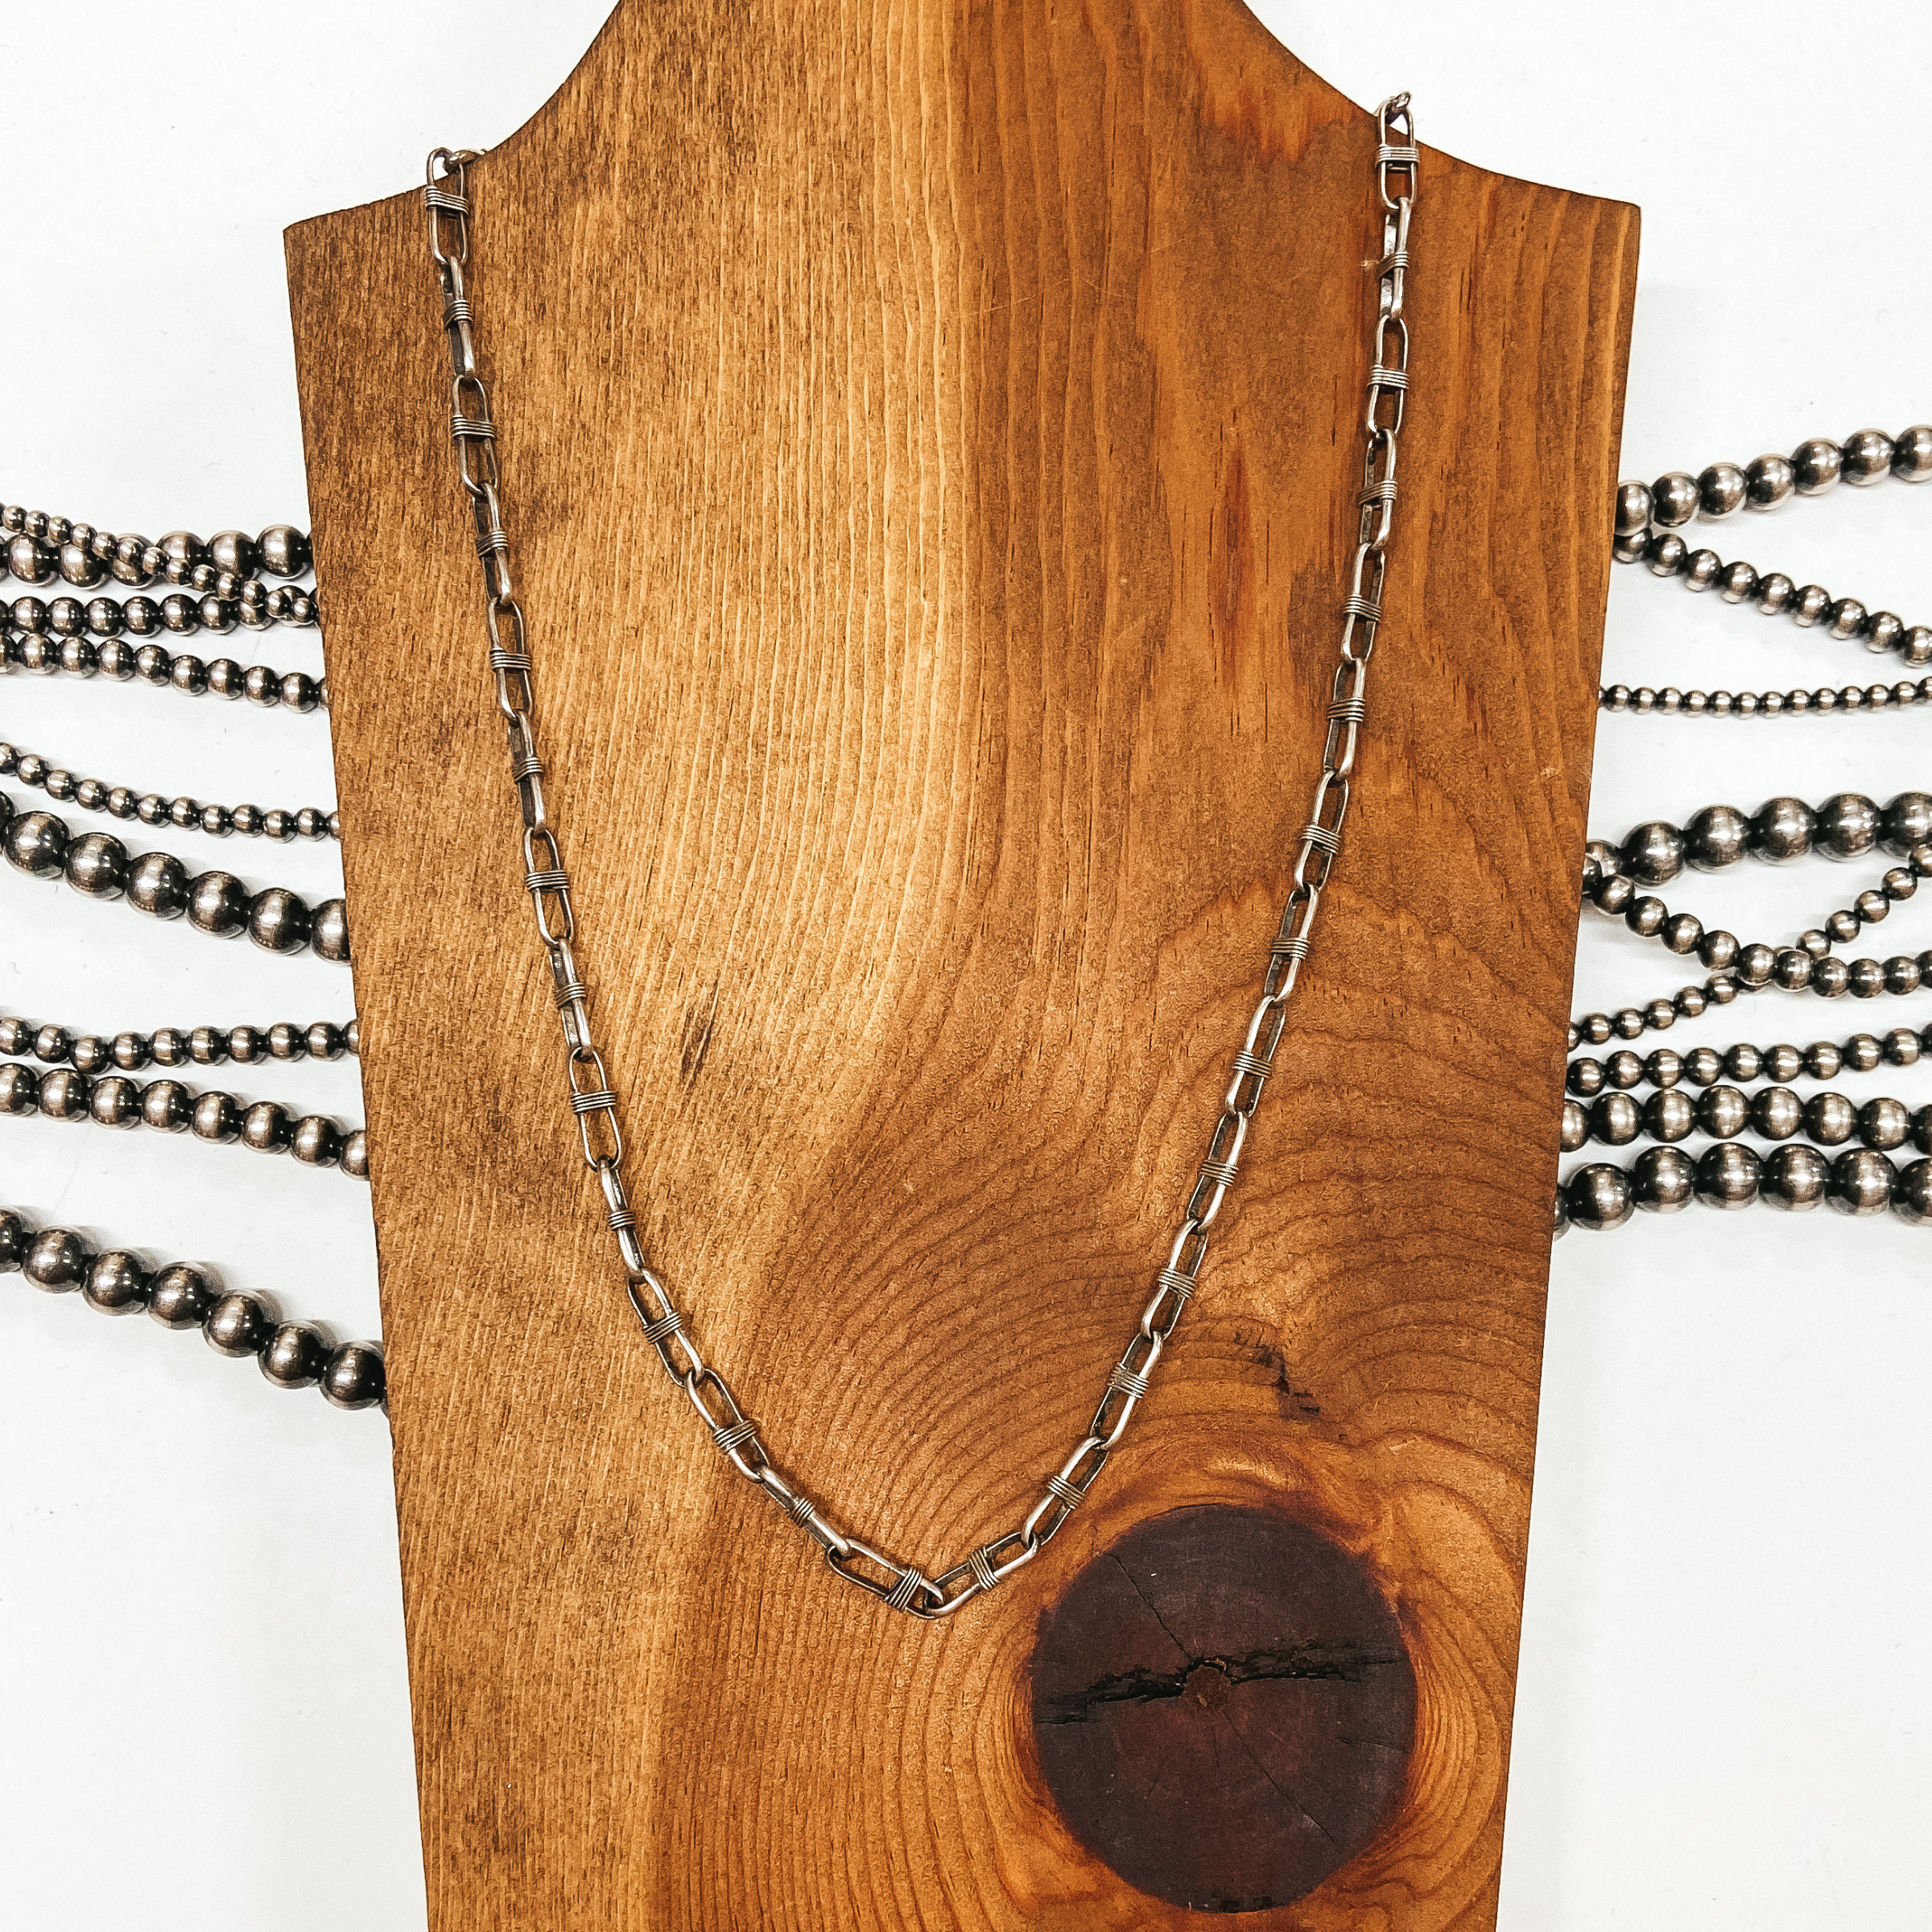 Sterling silver chain link necklace with wrapped detailing. Pictured on wooden slat with white background and Navajo pearls.